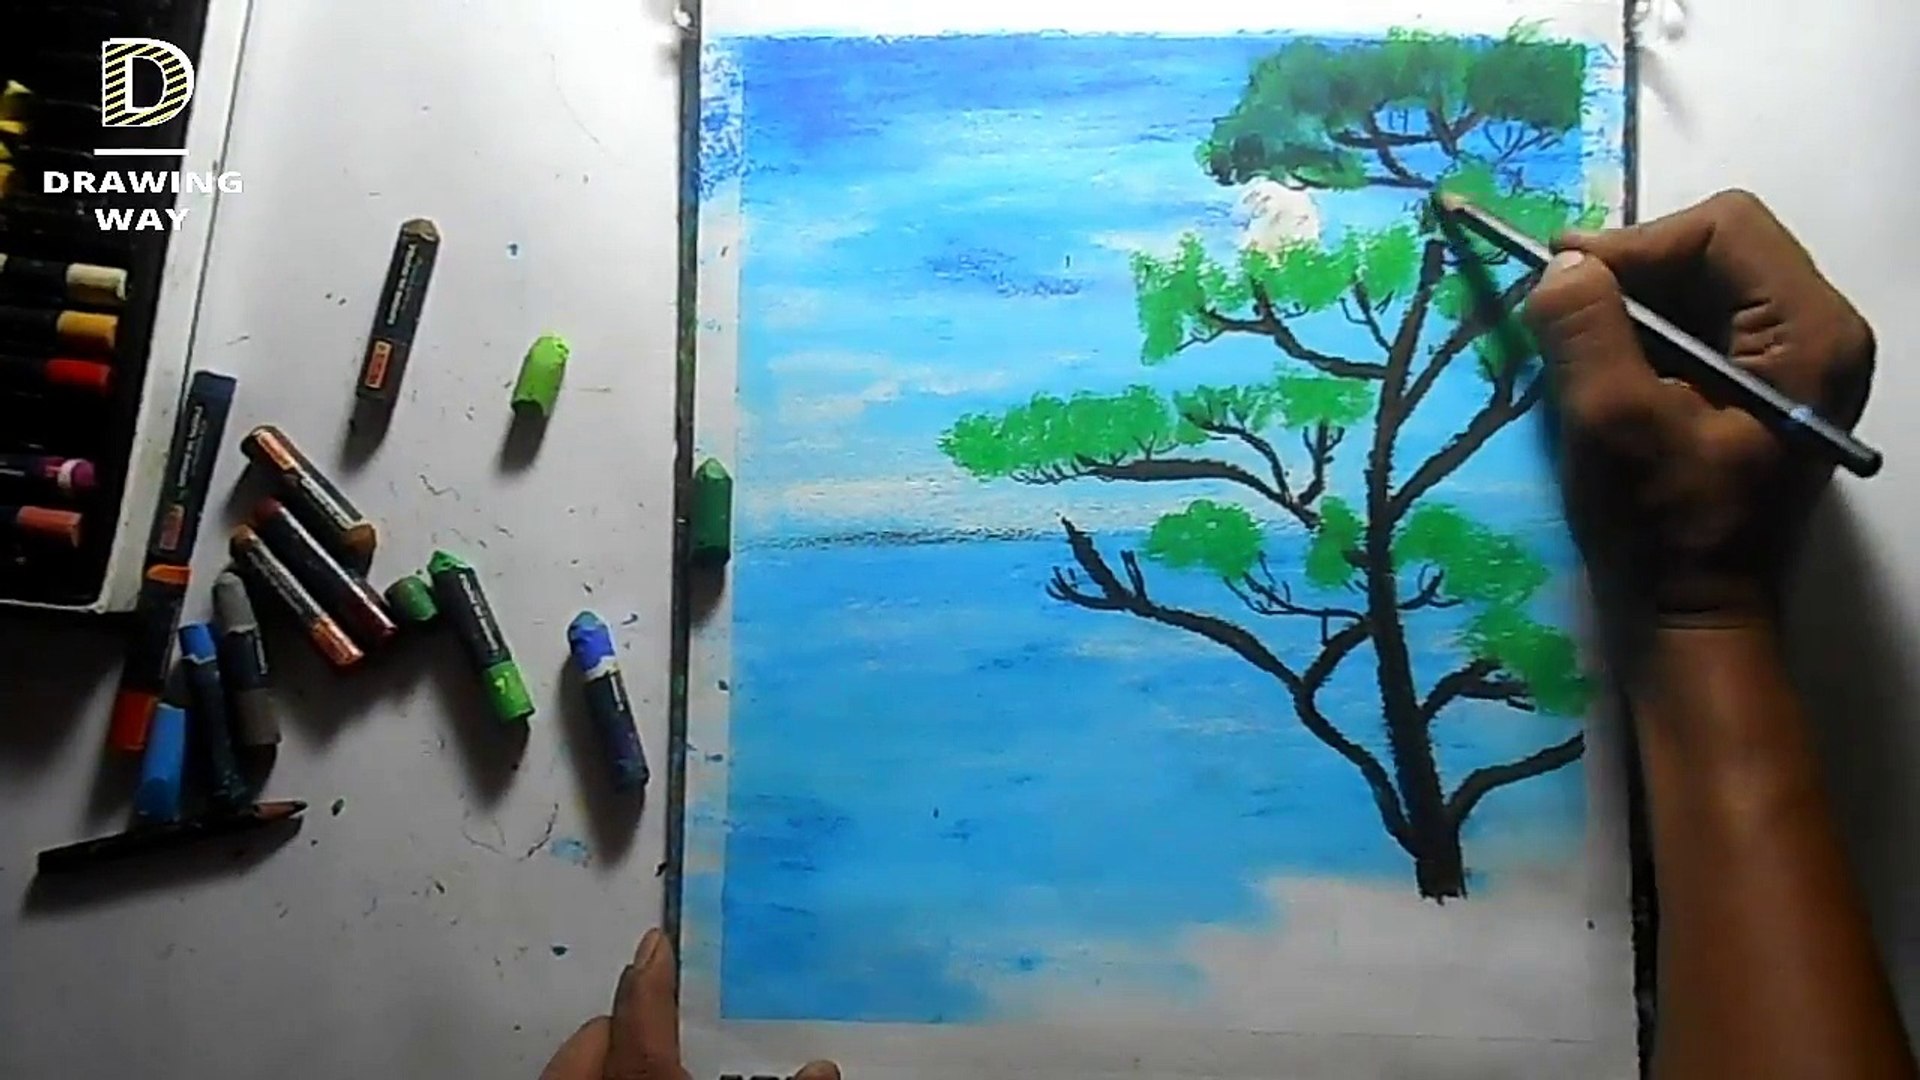 How To Draw Moonlight Scenery With Oil Pastels À¦ À¦¦ À¦° À¦à¦² À¦° À¦¦ À¦¶ À¦¯ 259 Video Dailymotion Hope you enjoy the video. how to draw moonlight scenery with oil pastels à¦ à¦¦ à¦° à¦à¦² à¦° à¦¦ à¦¶ à¦¯ 259